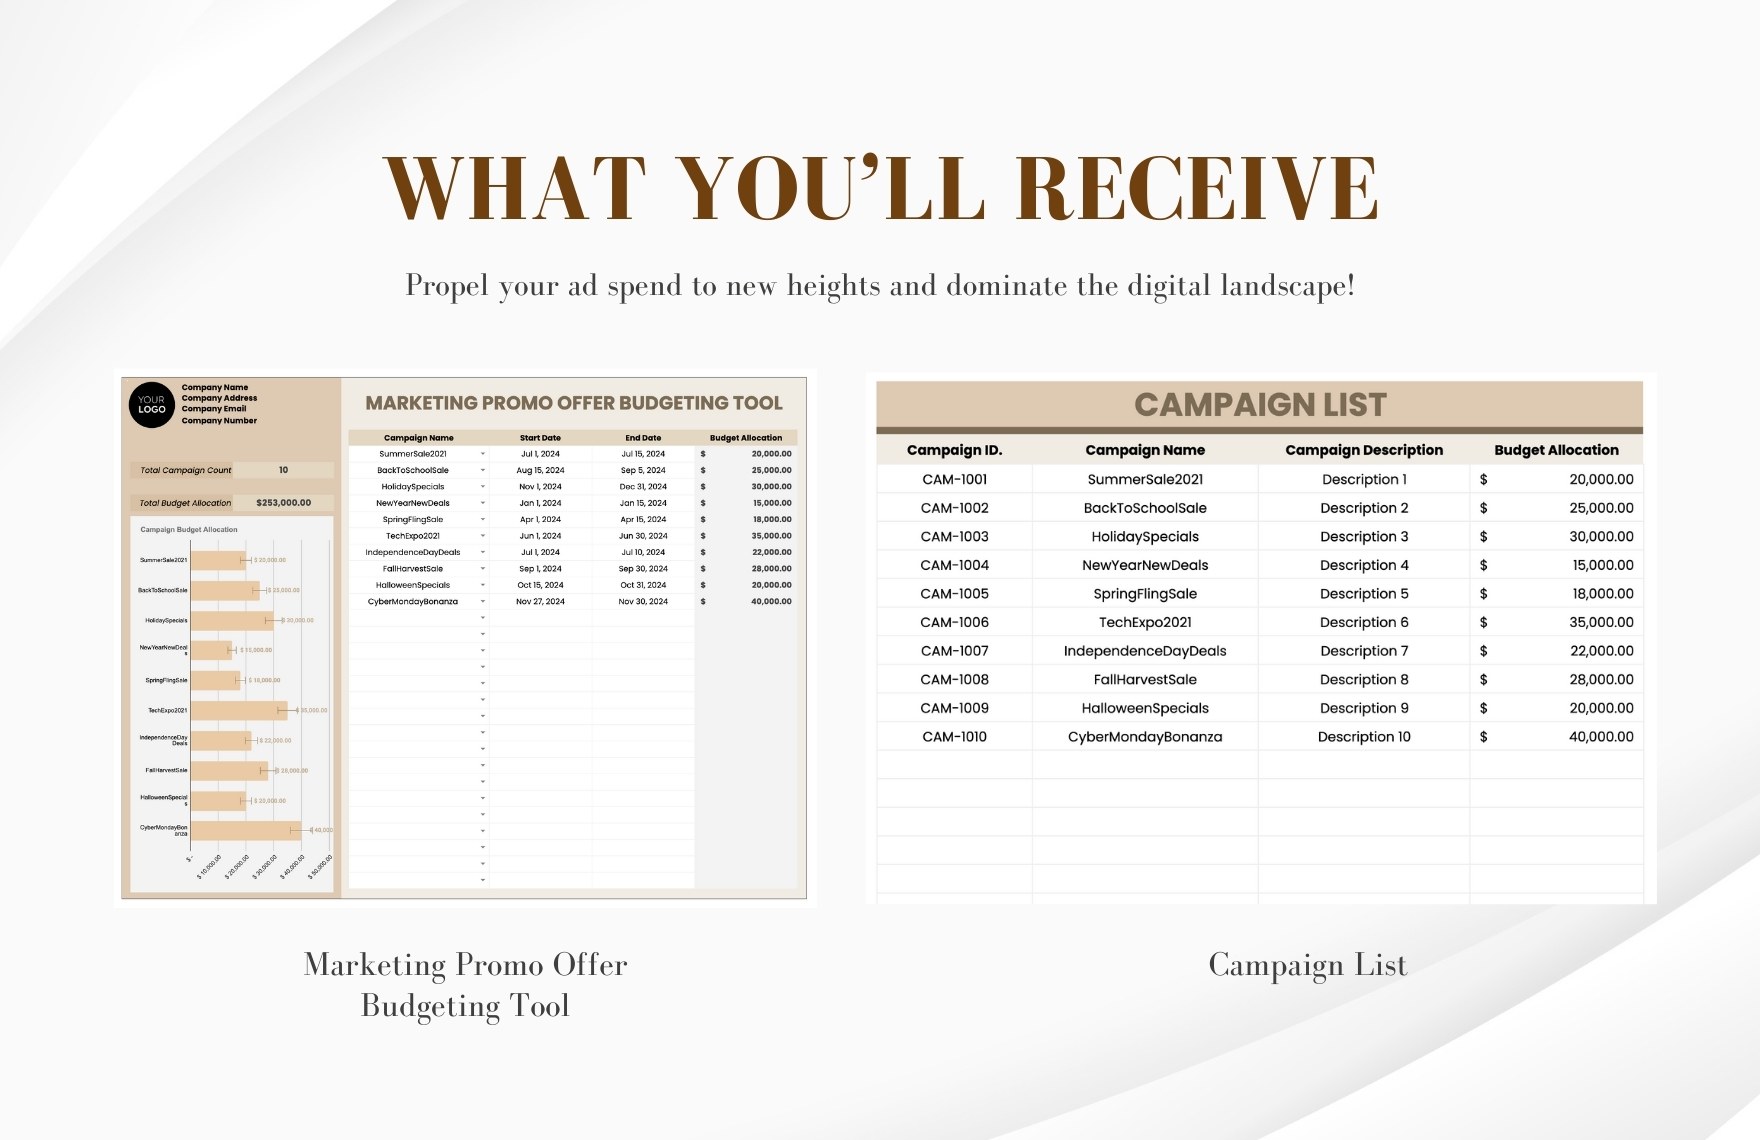 Marketing Promo Offer Budgeting Tool Template